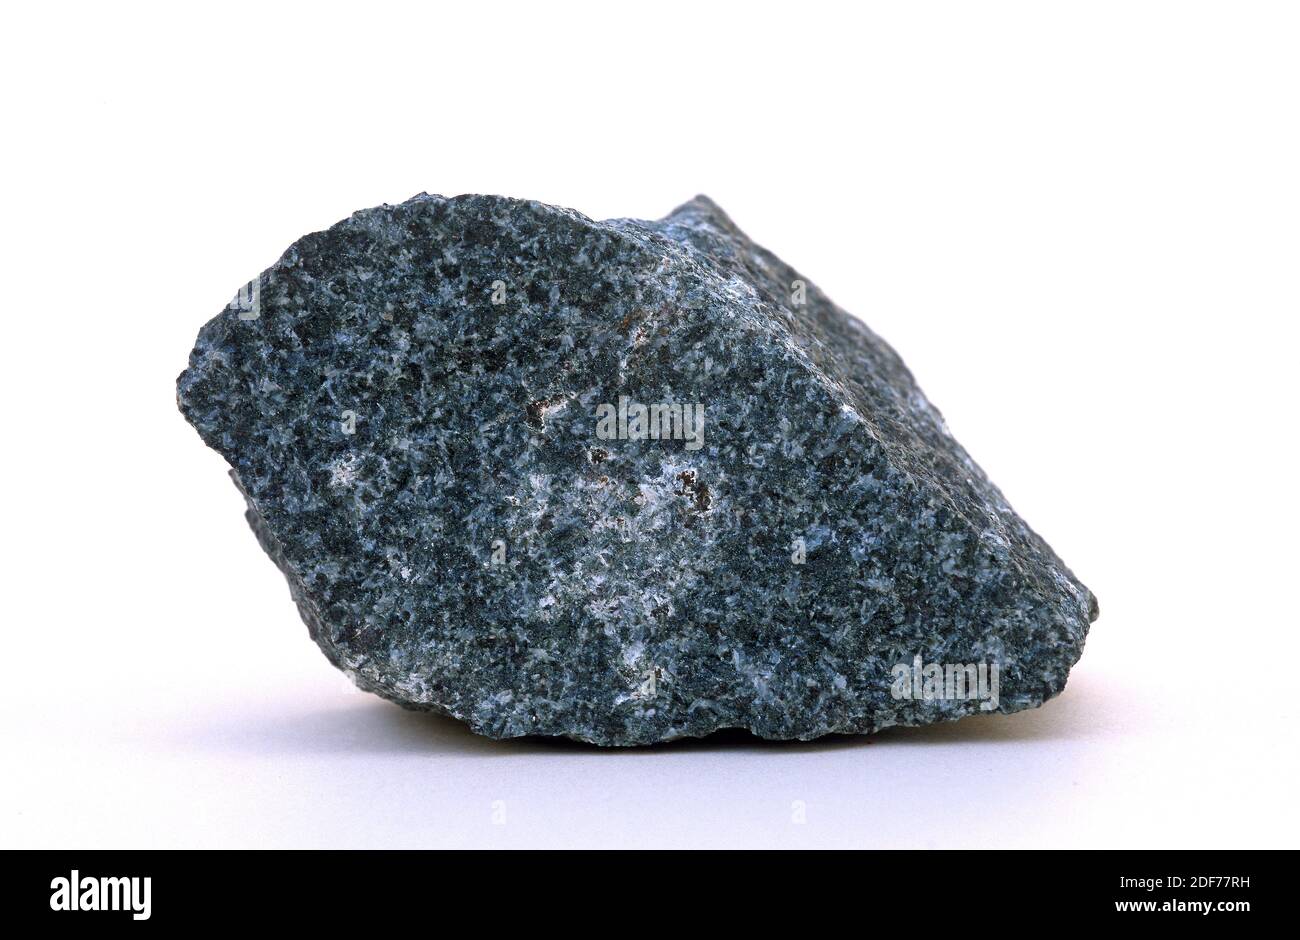 Diorite is an intrusive igneous rock. Its composition is intermediate between gabbro and granite. Sample. Stock Photo